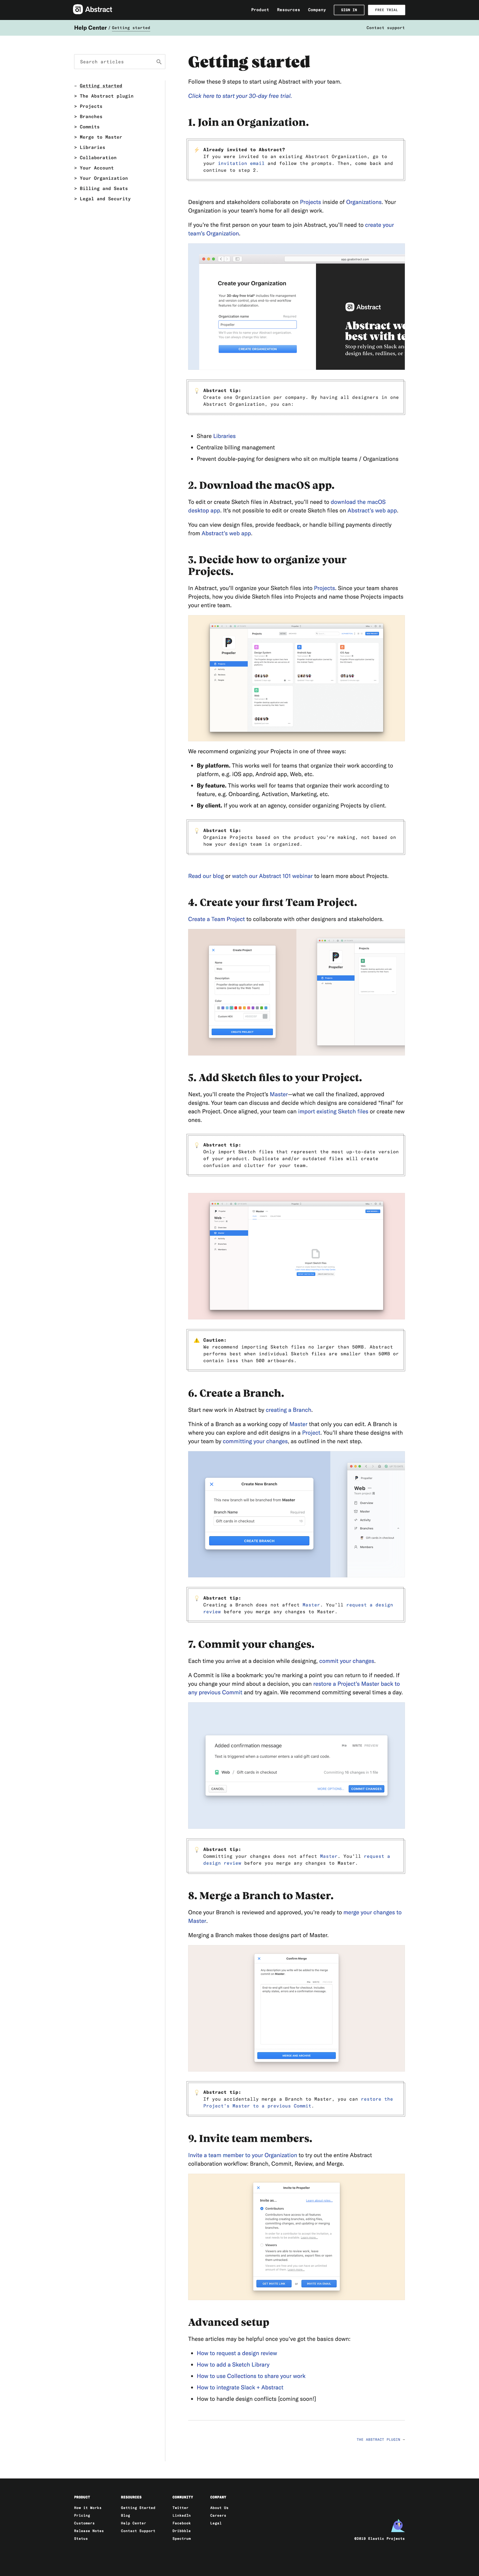 Screenshot of the Help - Getting Started page from the Abstract website.